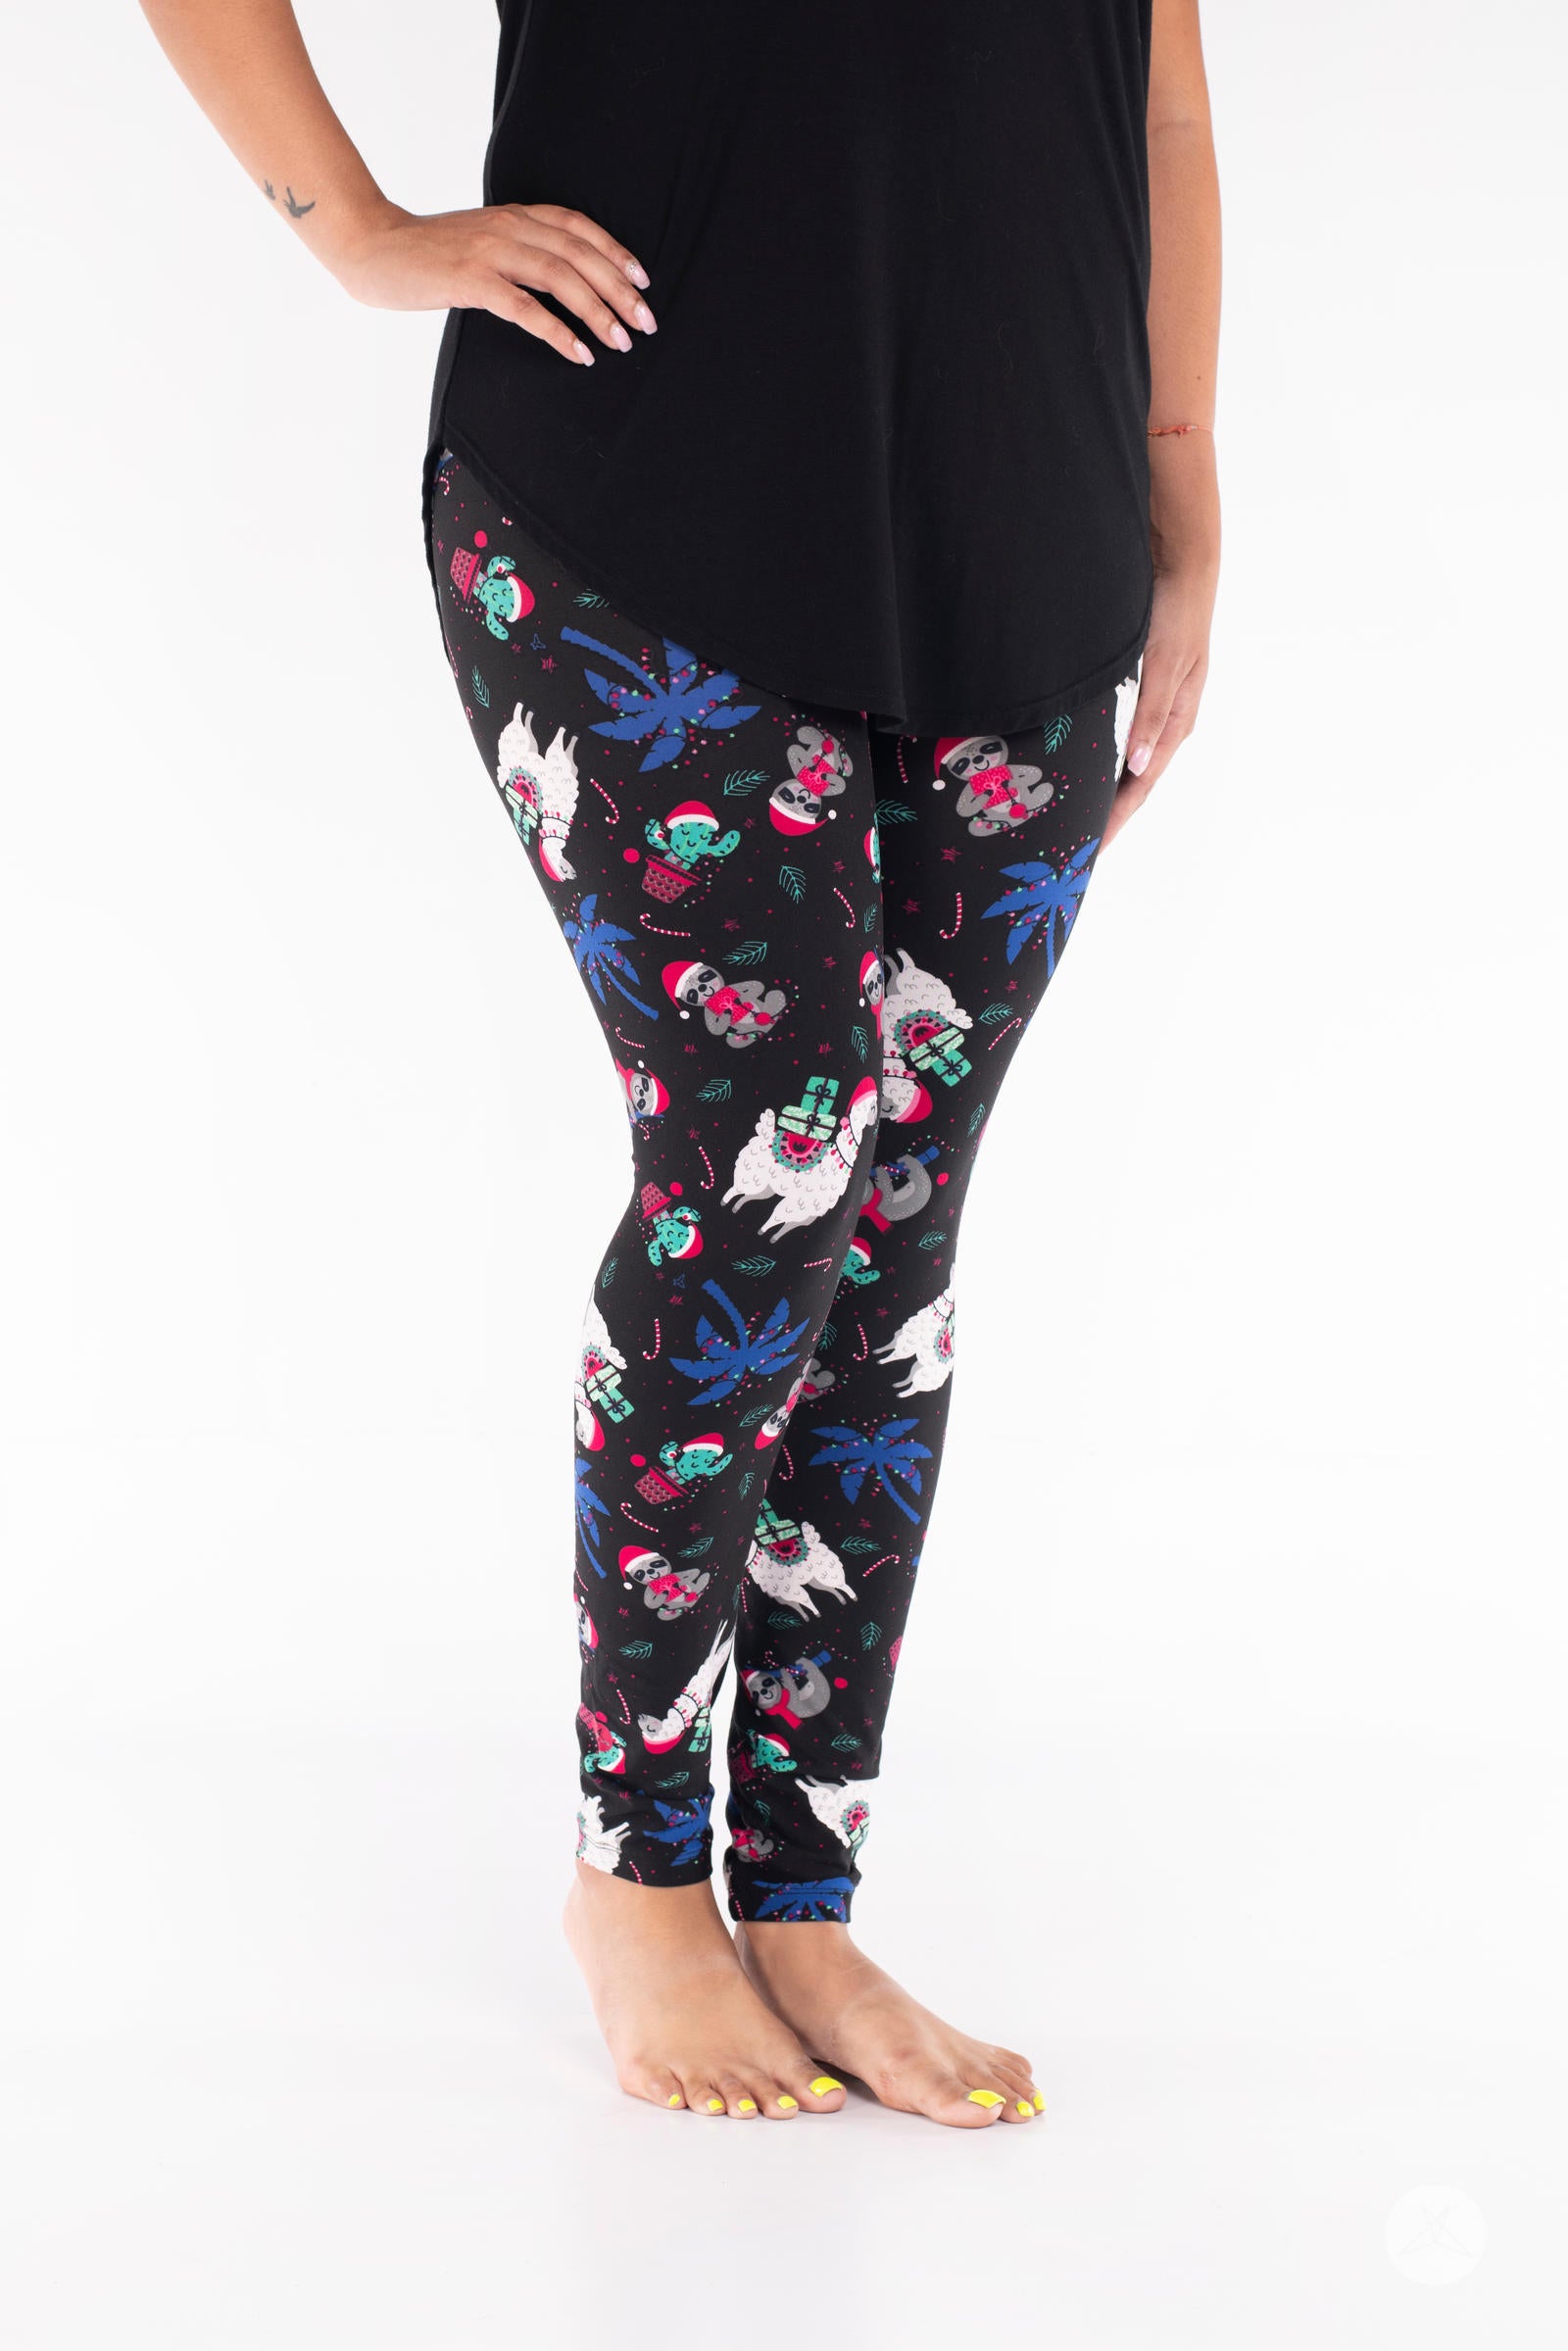 Deck The Palms Patterned Leggings